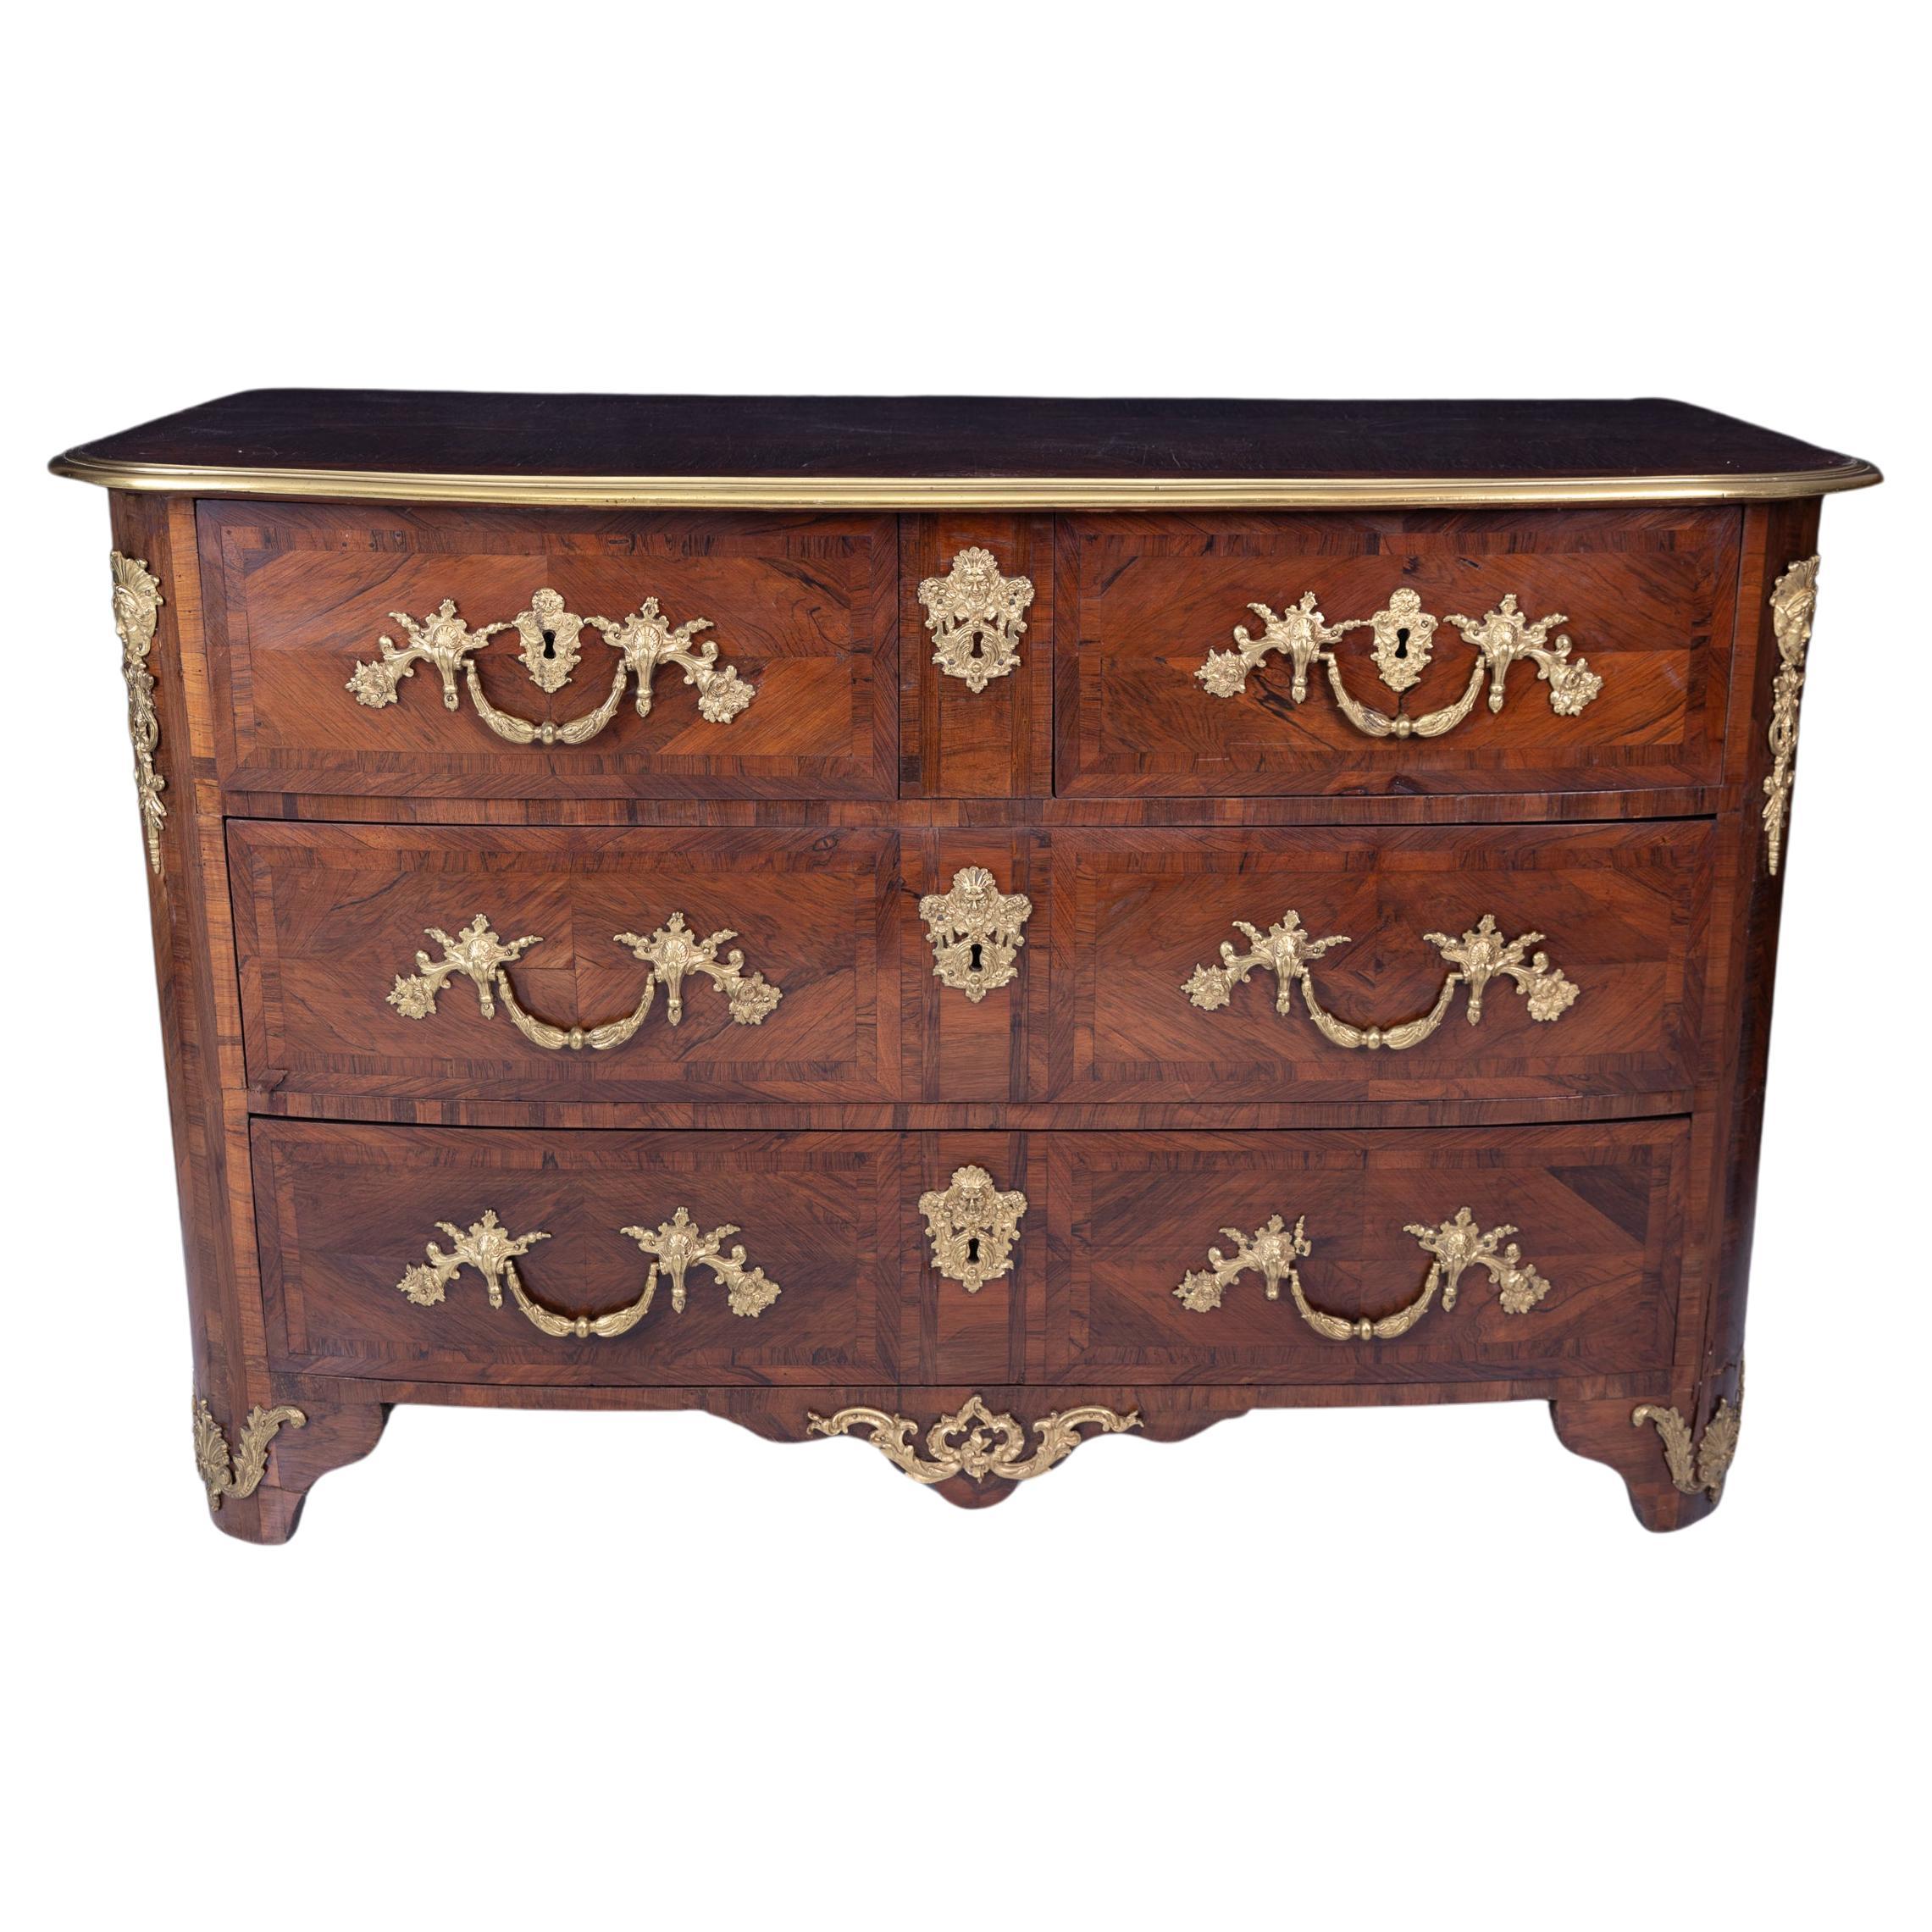 Exquisite Early 19th Century Regence Three Drawer Commode with Bronze D'ore 